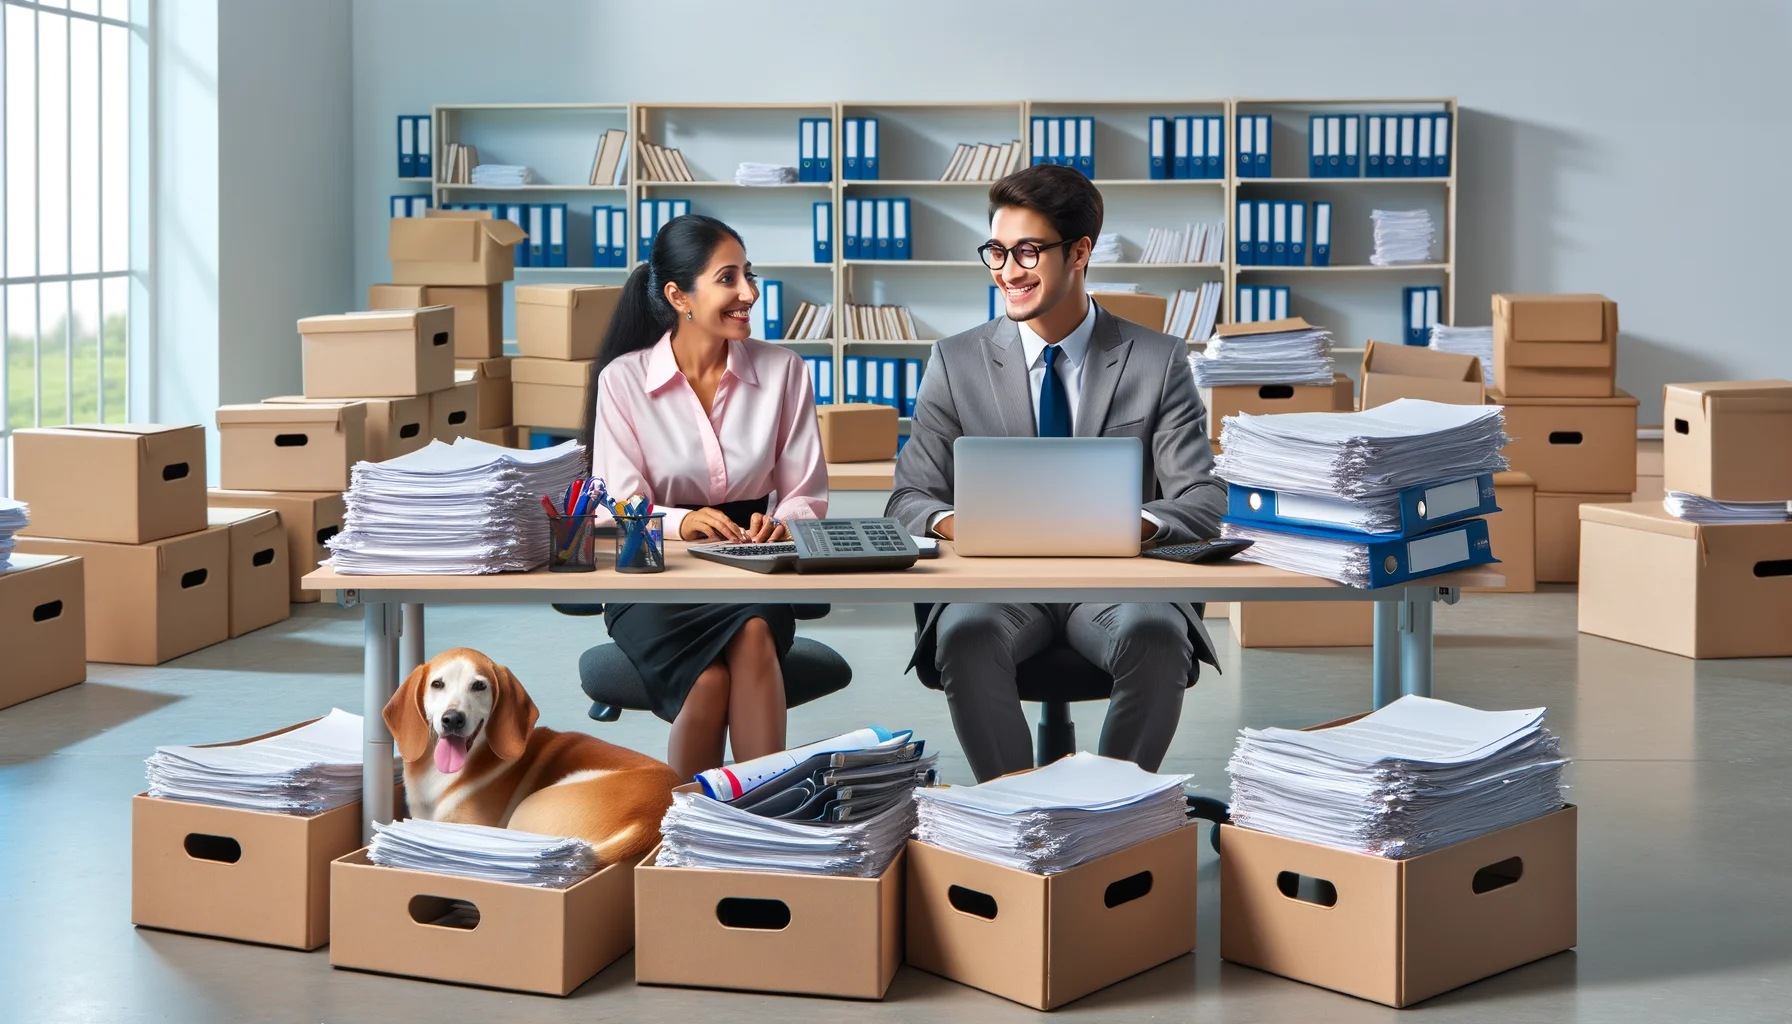 Create a humorous, reality-based image where the forms and contracts necessary for real estate transactions are being handled in the most ideal and efficient scenario. Picture a perfectly organized office without any clutter and boxes filled with sorted documents. A Caucasian woman and a South Asian man, both dressed professionally, could be present, cheerfully-conversing and working together at a large neat desk. On the desk, advanced technological gadgets could be seen helping them manage the paperwork. Maybe a pet like a small dog could be seen napping peacefully in a corner, adding a light-hearted element to the scene.